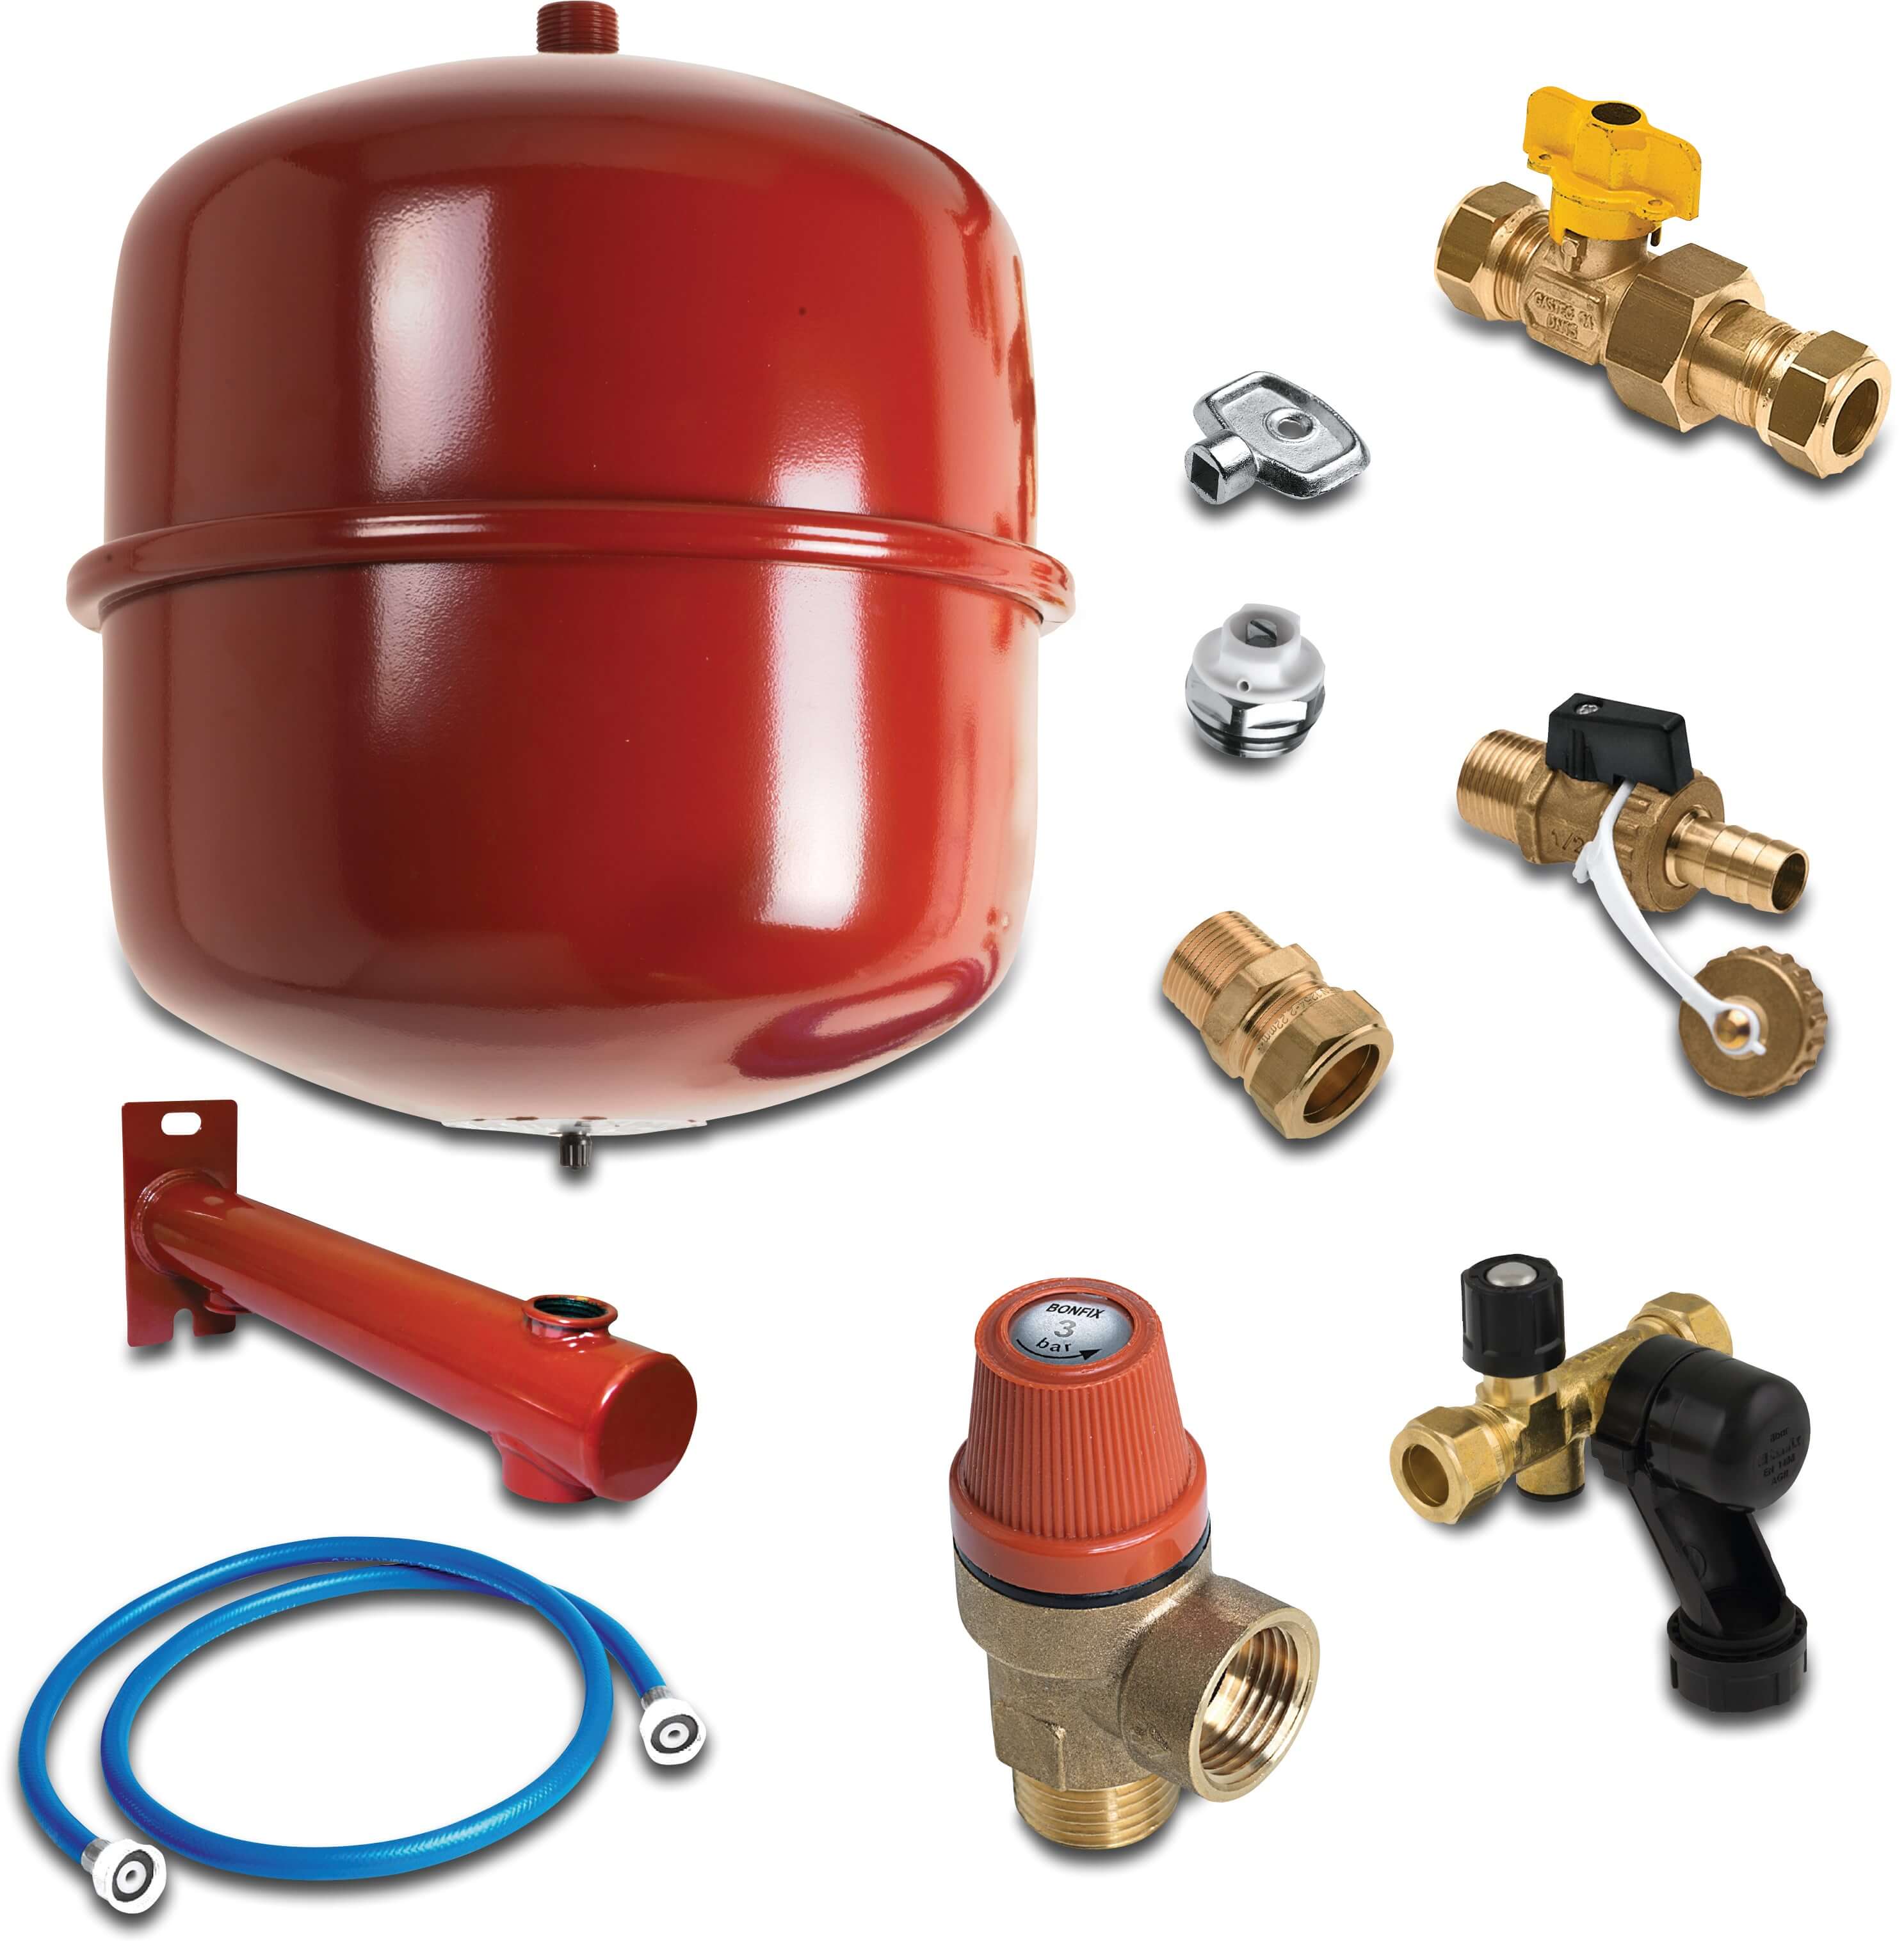 Central heating connection set